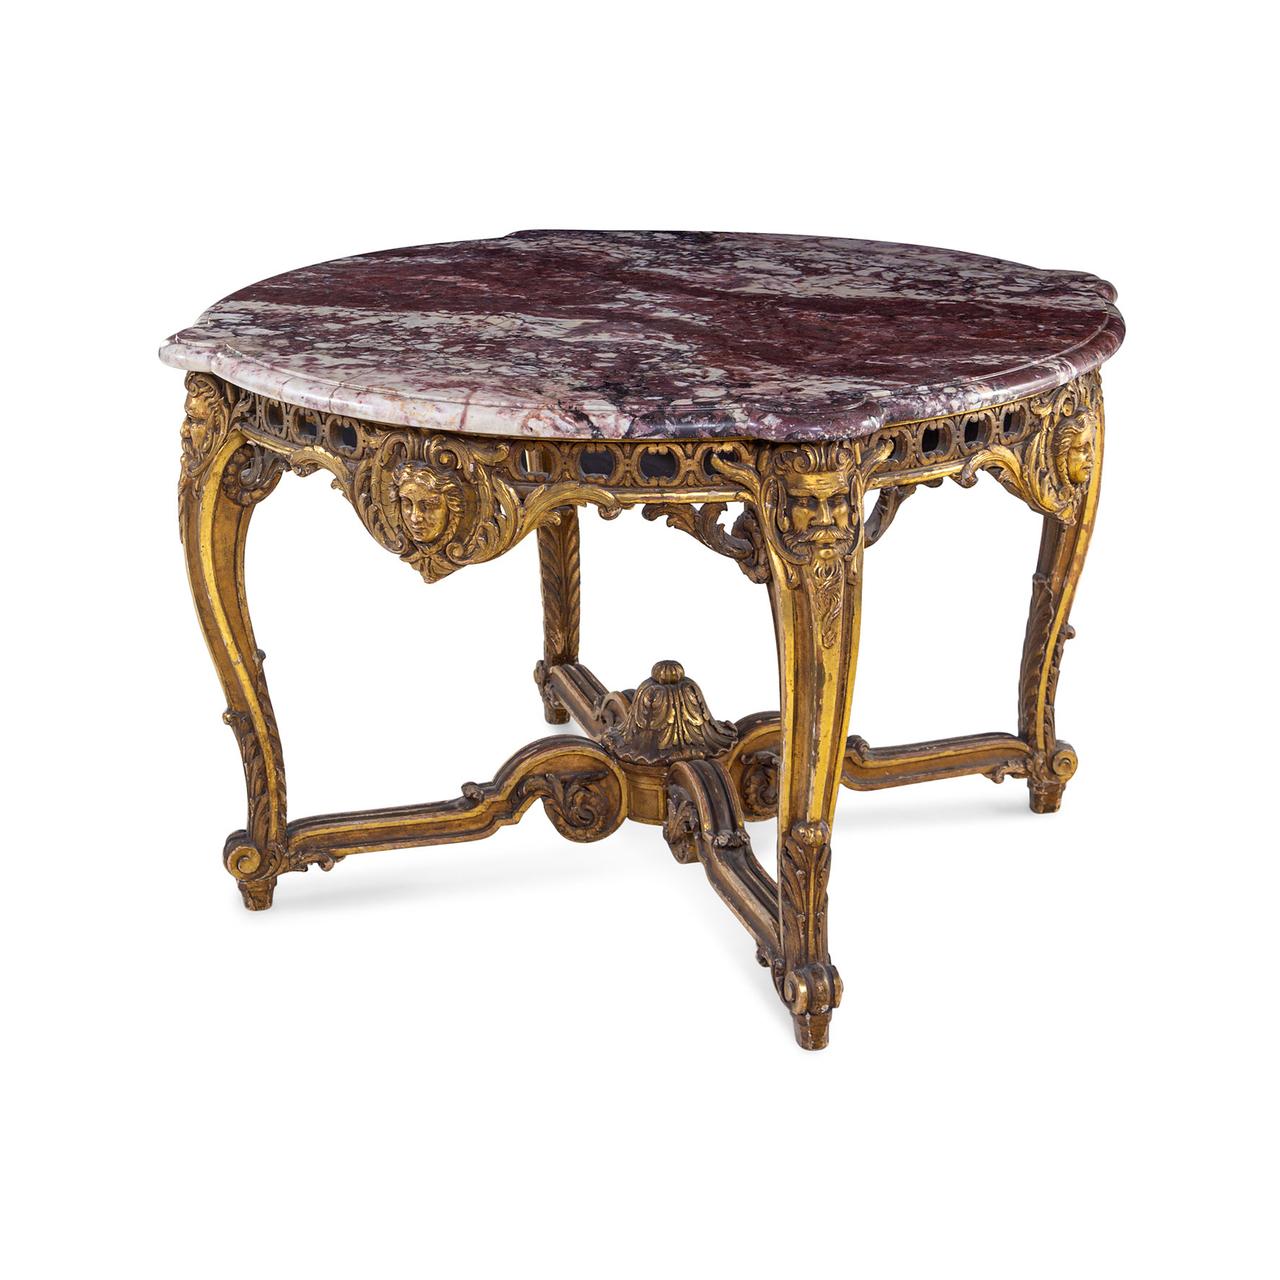 A fine quality Louis XV style marble-top giltwood center table

Origin: French
Date: 19th century
Dimension: 31 in. x 51 in.